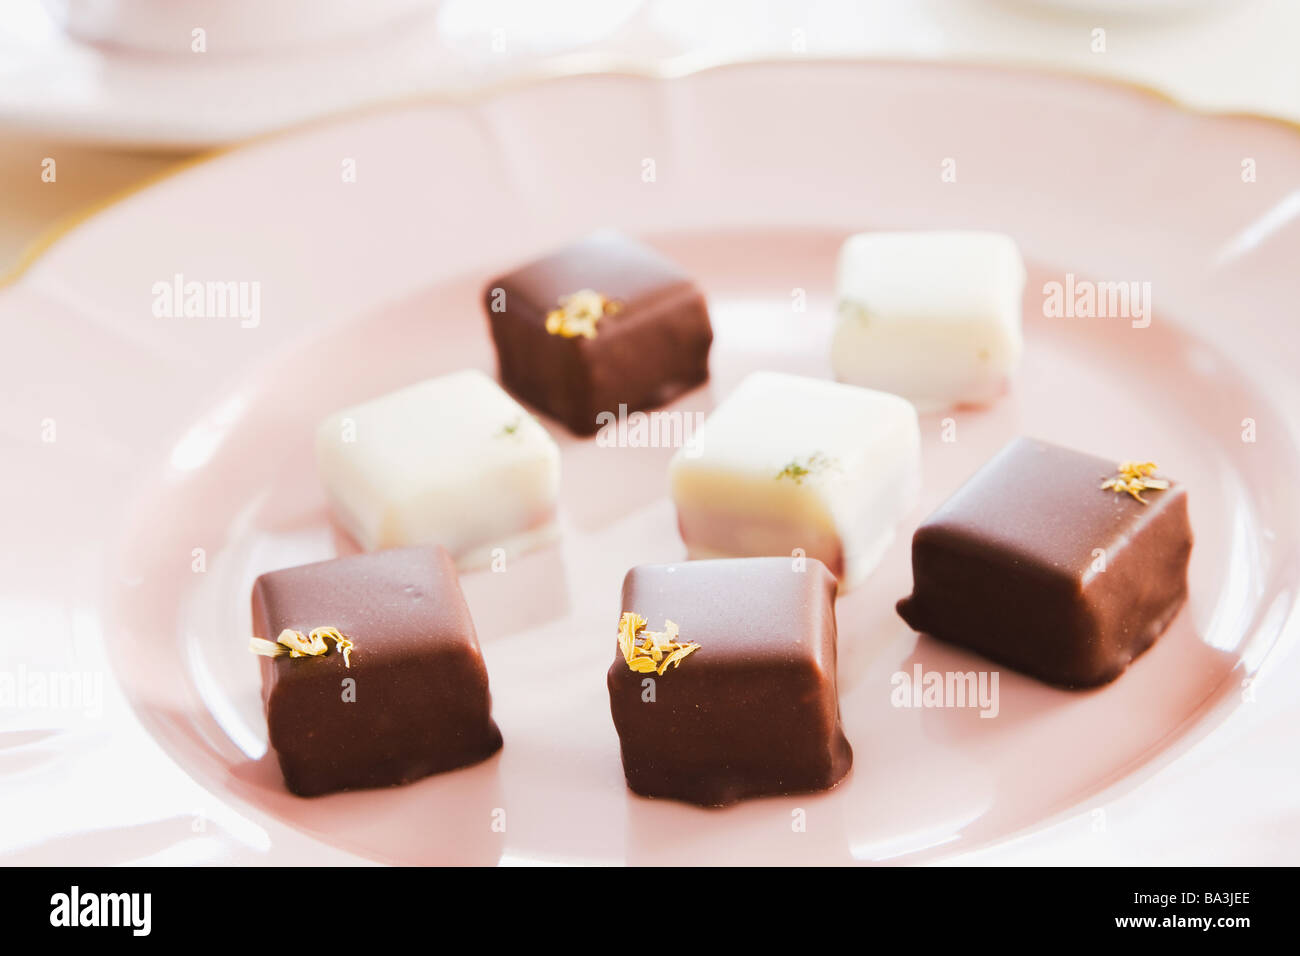 Milk Chocolates in a Plate Stock Photo